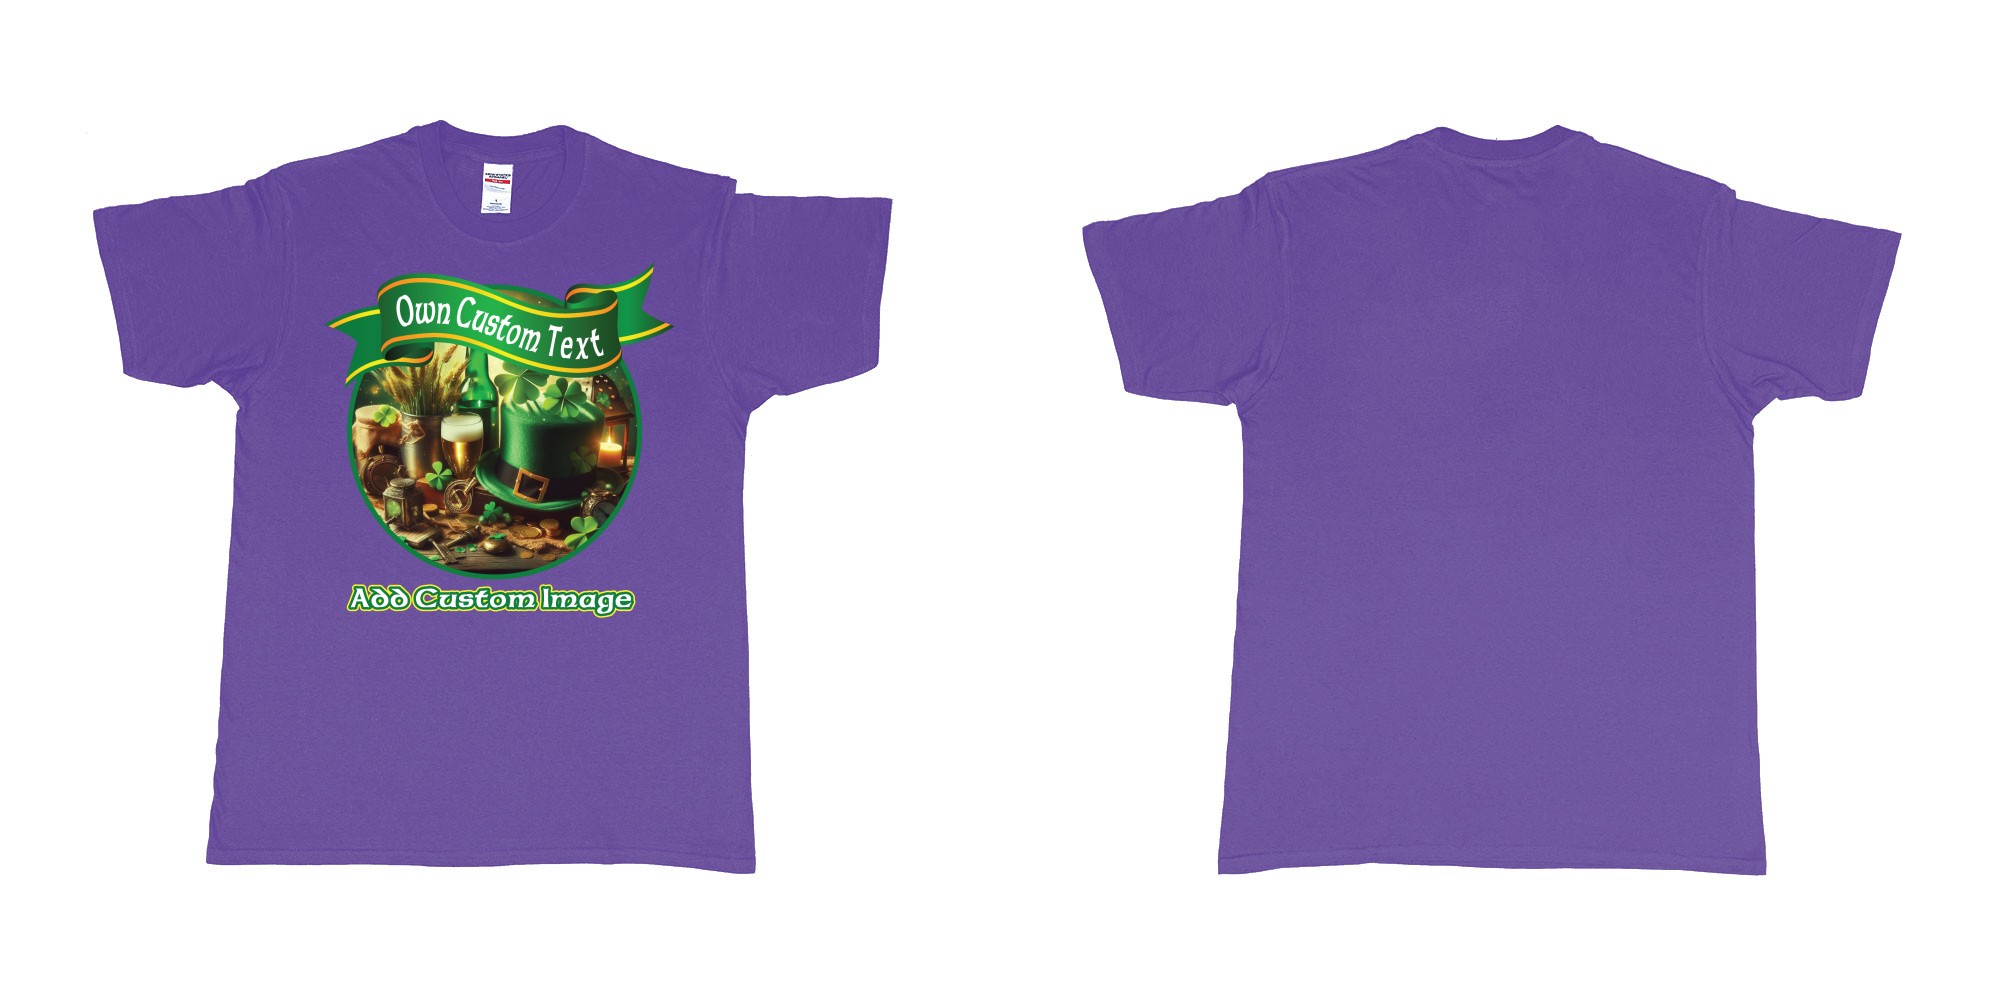 Custom tshirt design st patricks day four leaf clover custom printing in fabric color purple choice your own text made in Bali by The Pirate Way